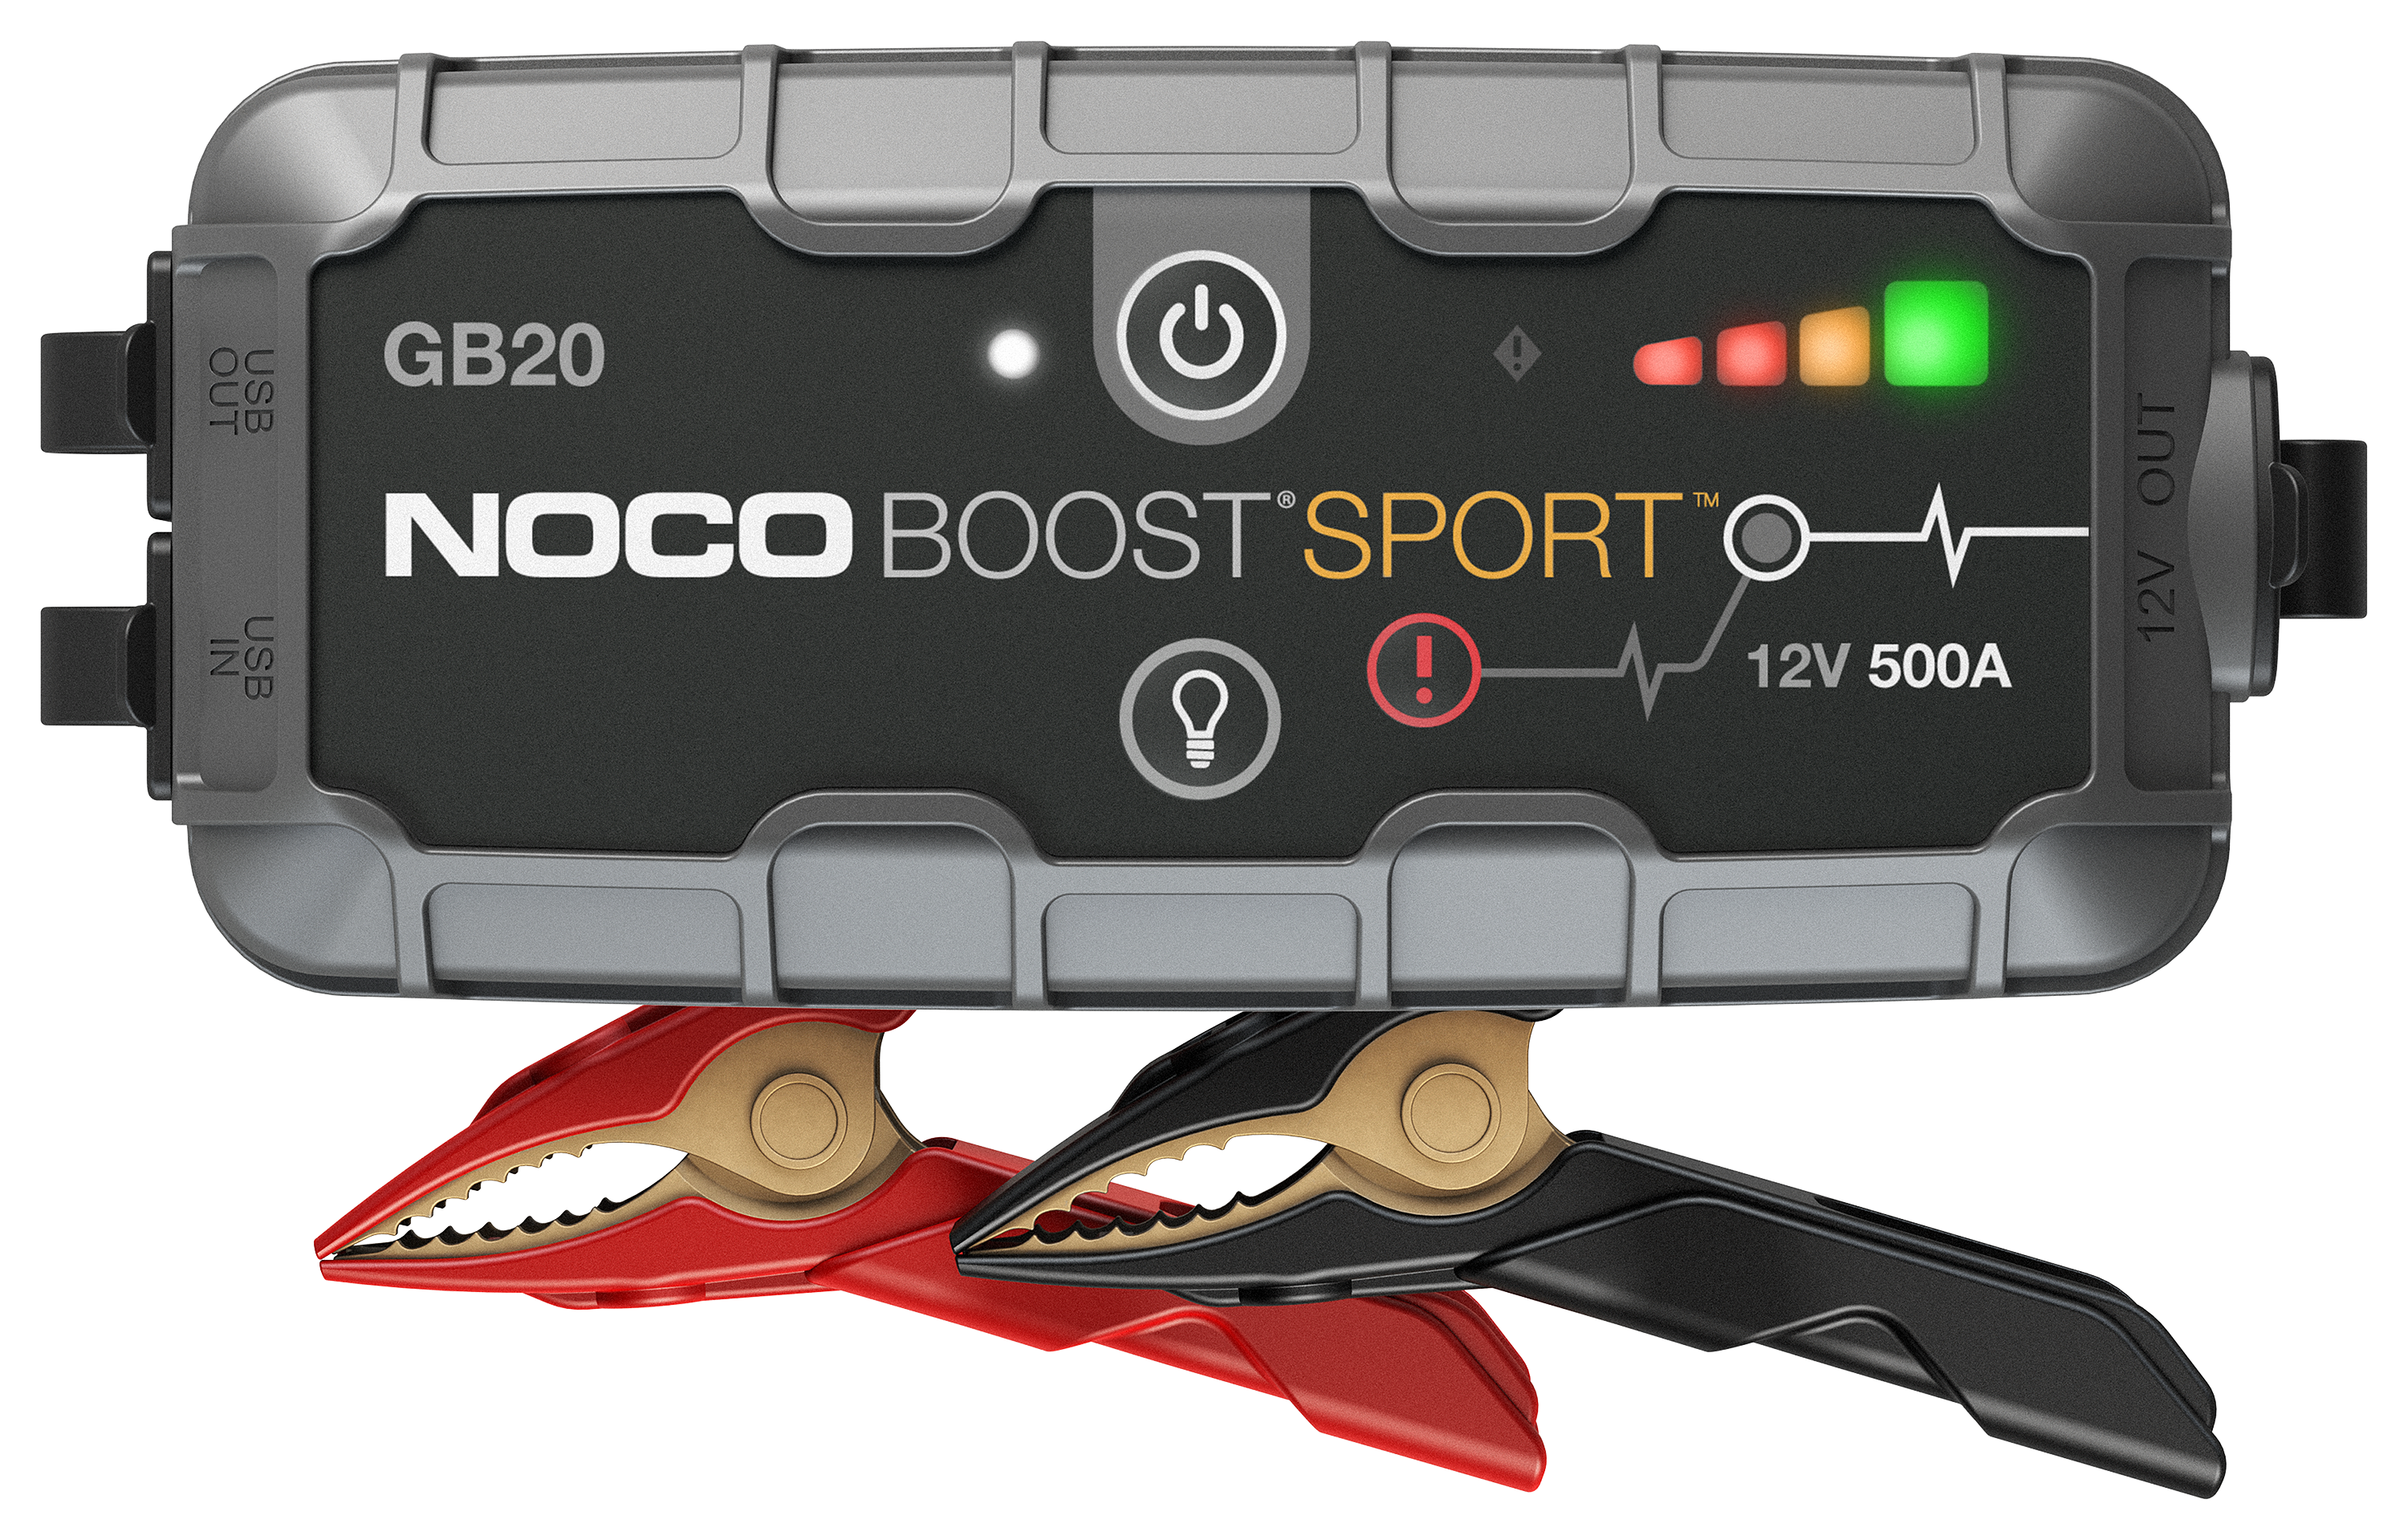 NOCO Boost Pro Jump Starter Review Video